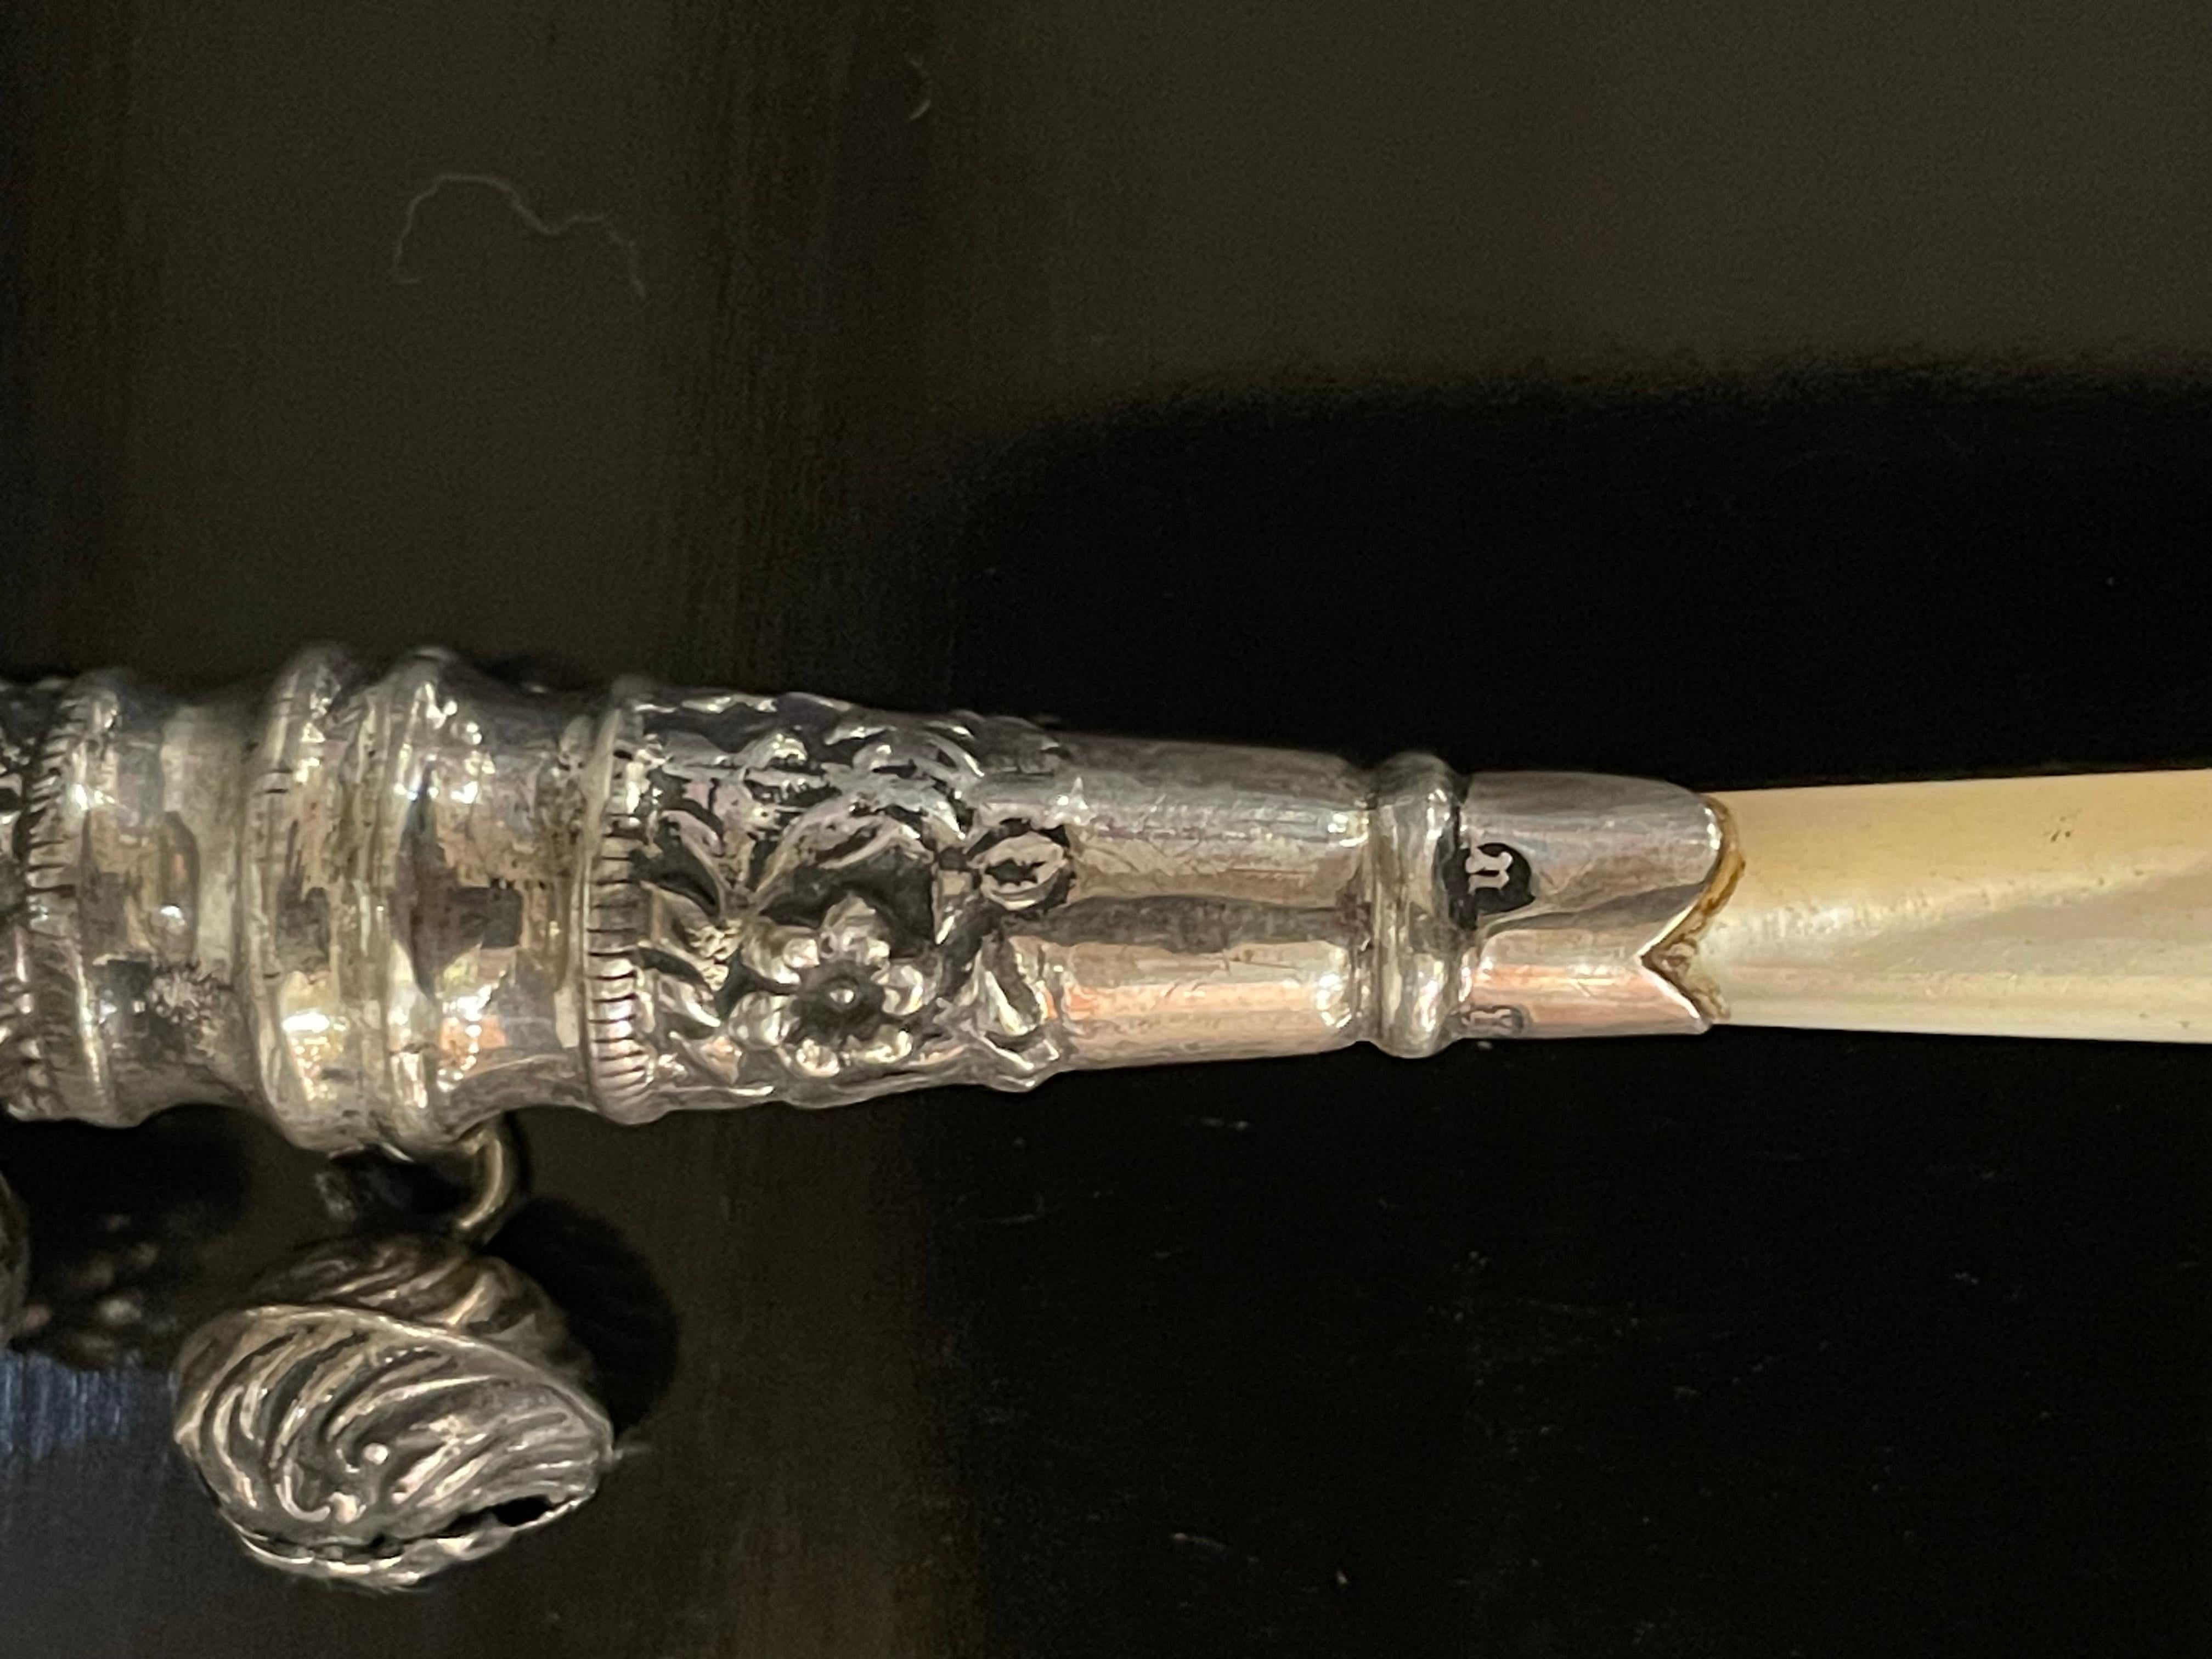 AN ENGLISH STERLING SILVER BABY RATTLE WITH WHISTLE END AND MOTHER OF PEARL HANDLE, MADE IN BIRMINGHAM, CIRCA 1894

Provenance: Private Australian Collection.